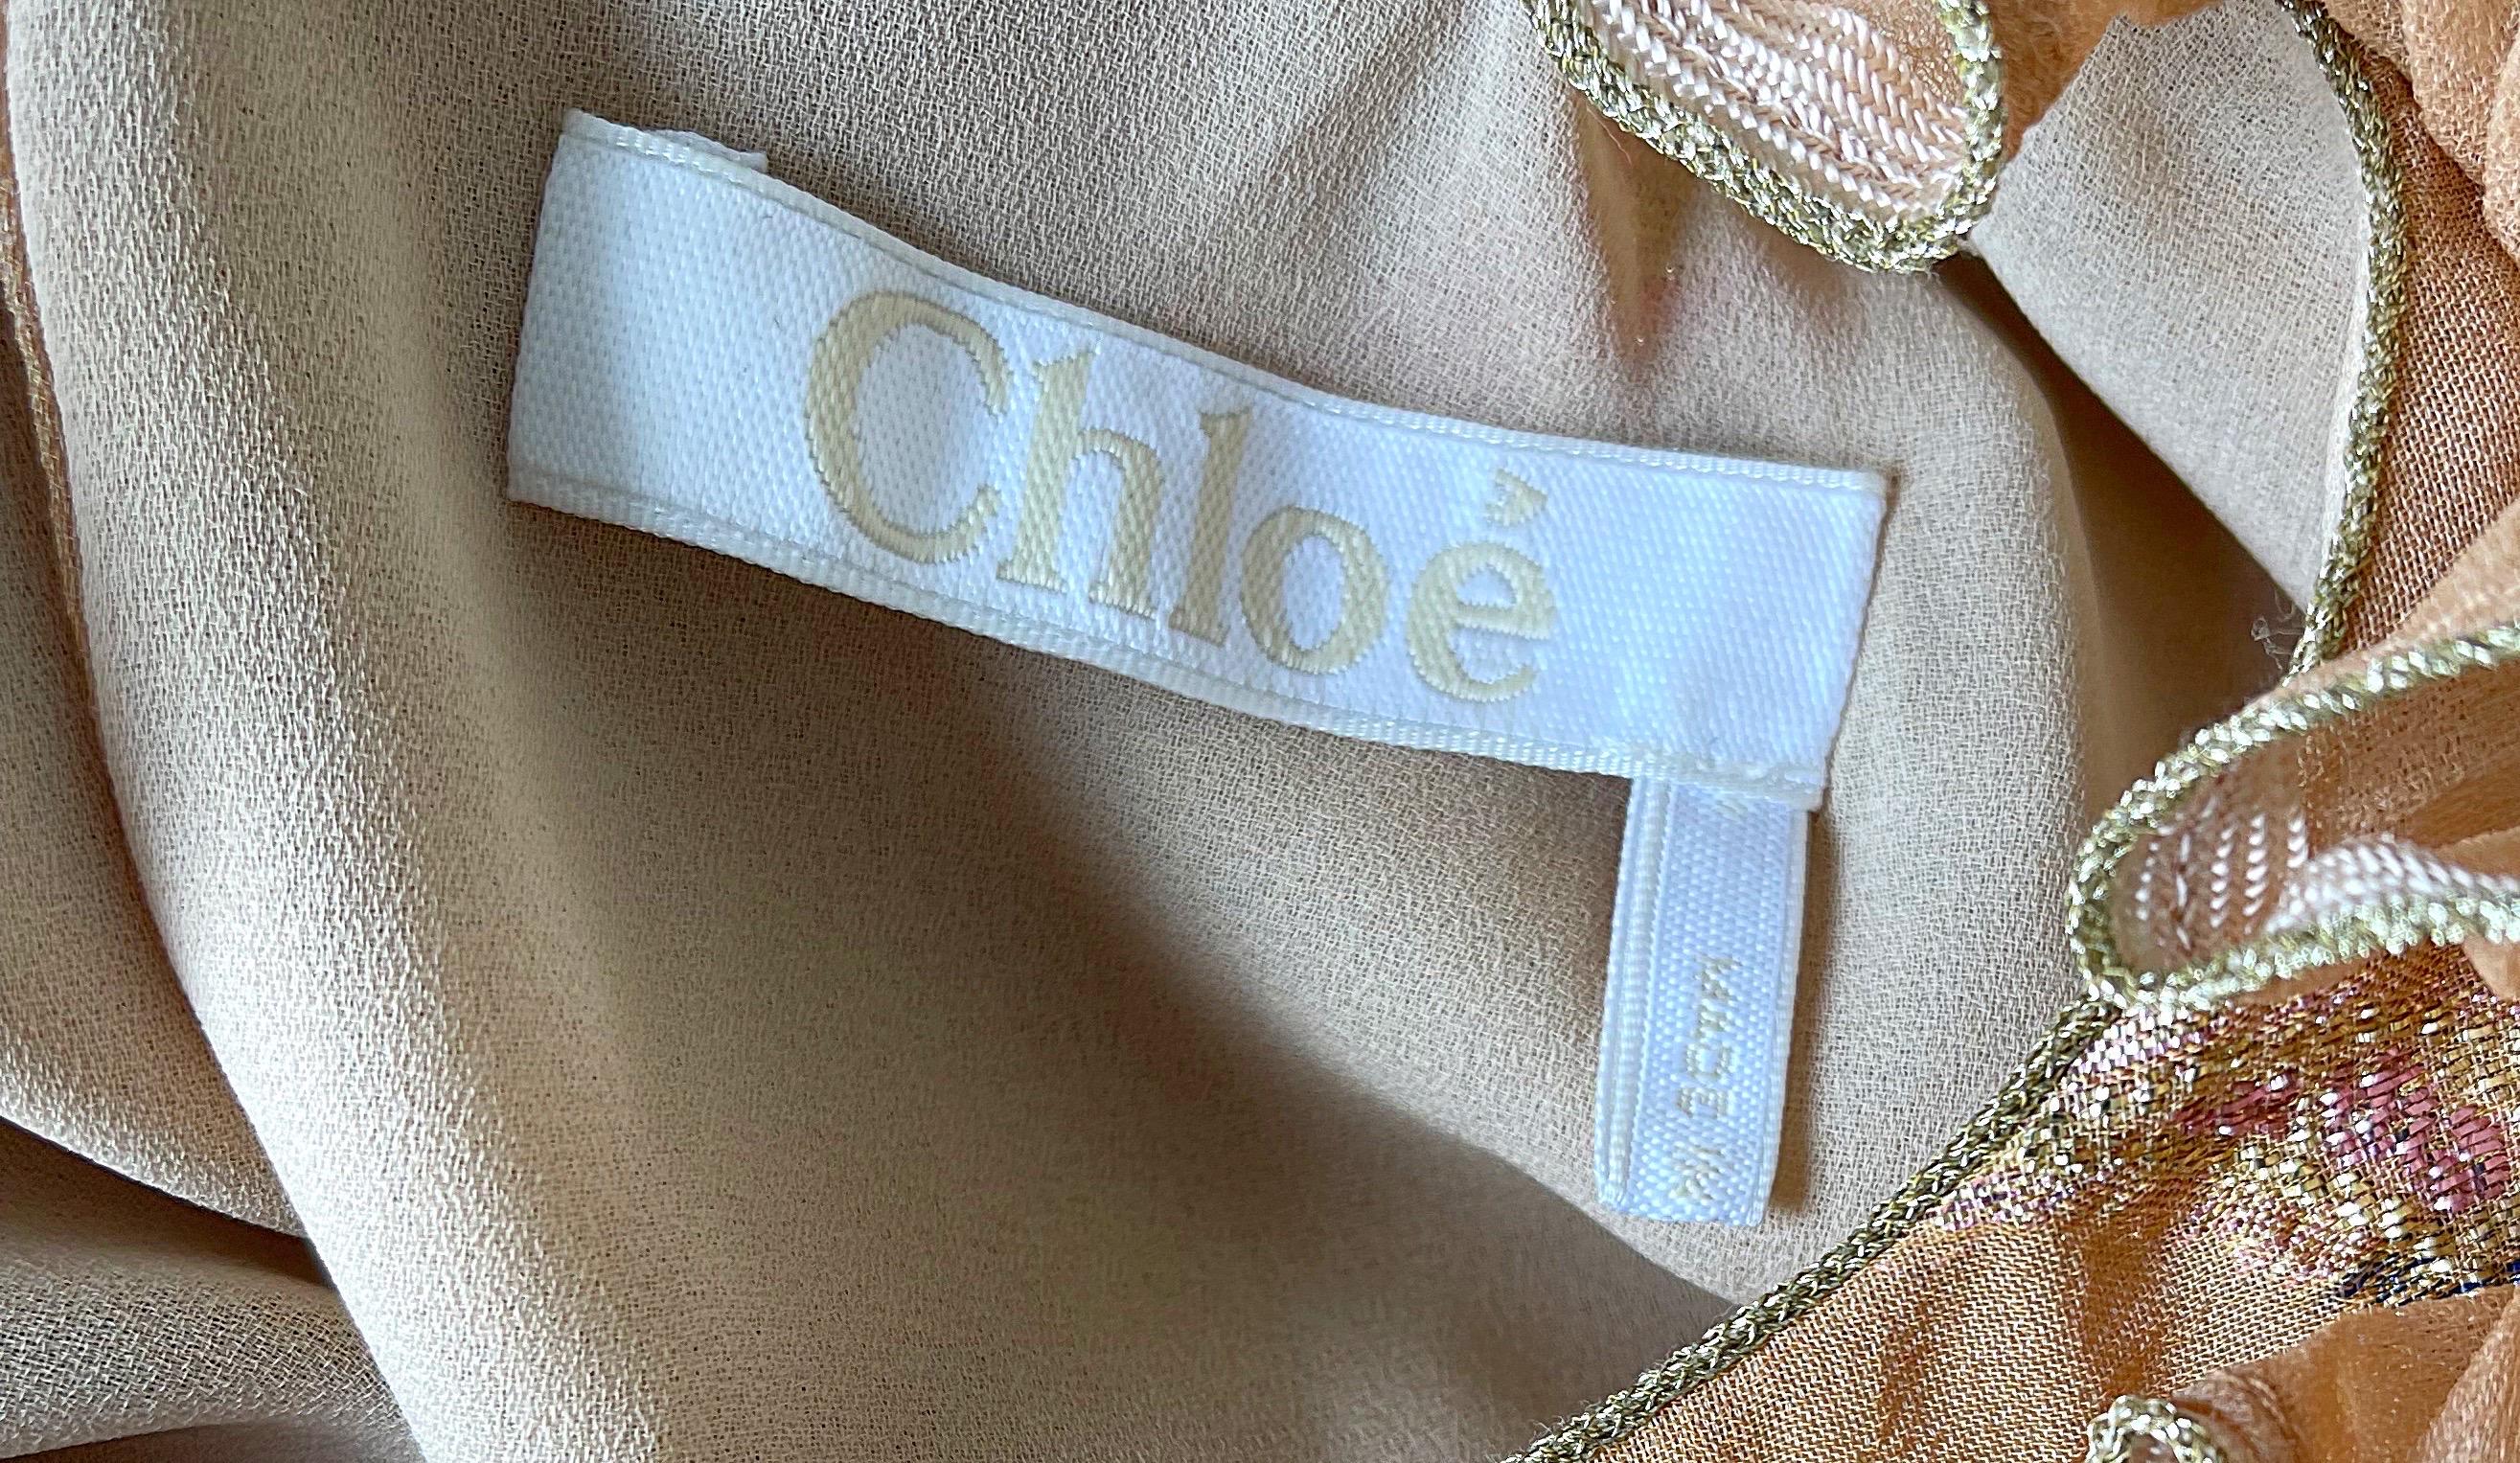 Chloe Ad Campaign Fall 2017 Terra Cotta Silk Chiffon Metallic Paisley Boho Dress In Excellent Condition For Sale In San Diego, CA